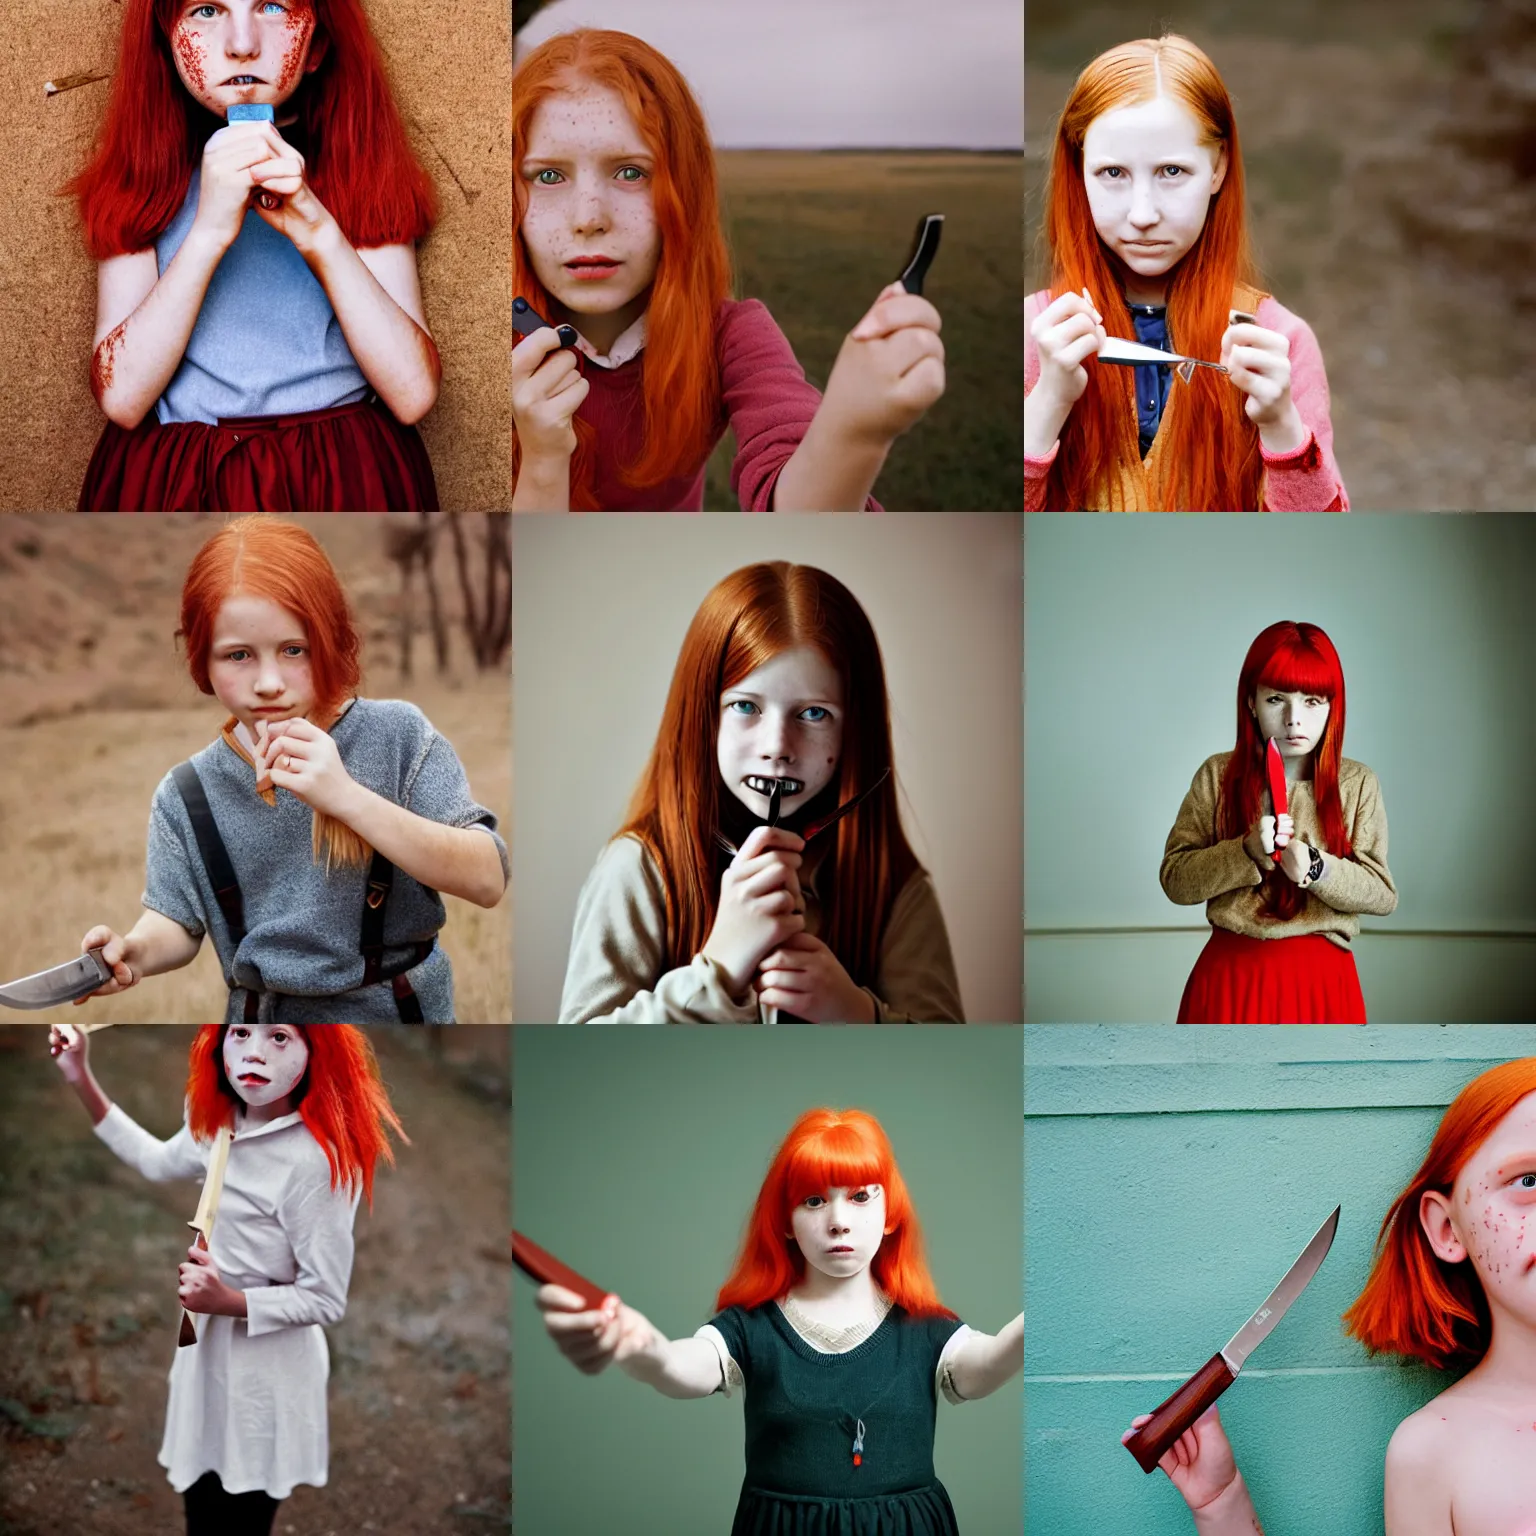 Prompt: photograph of a ten year old girl holding a knife by wes anderson, red hair, freckles